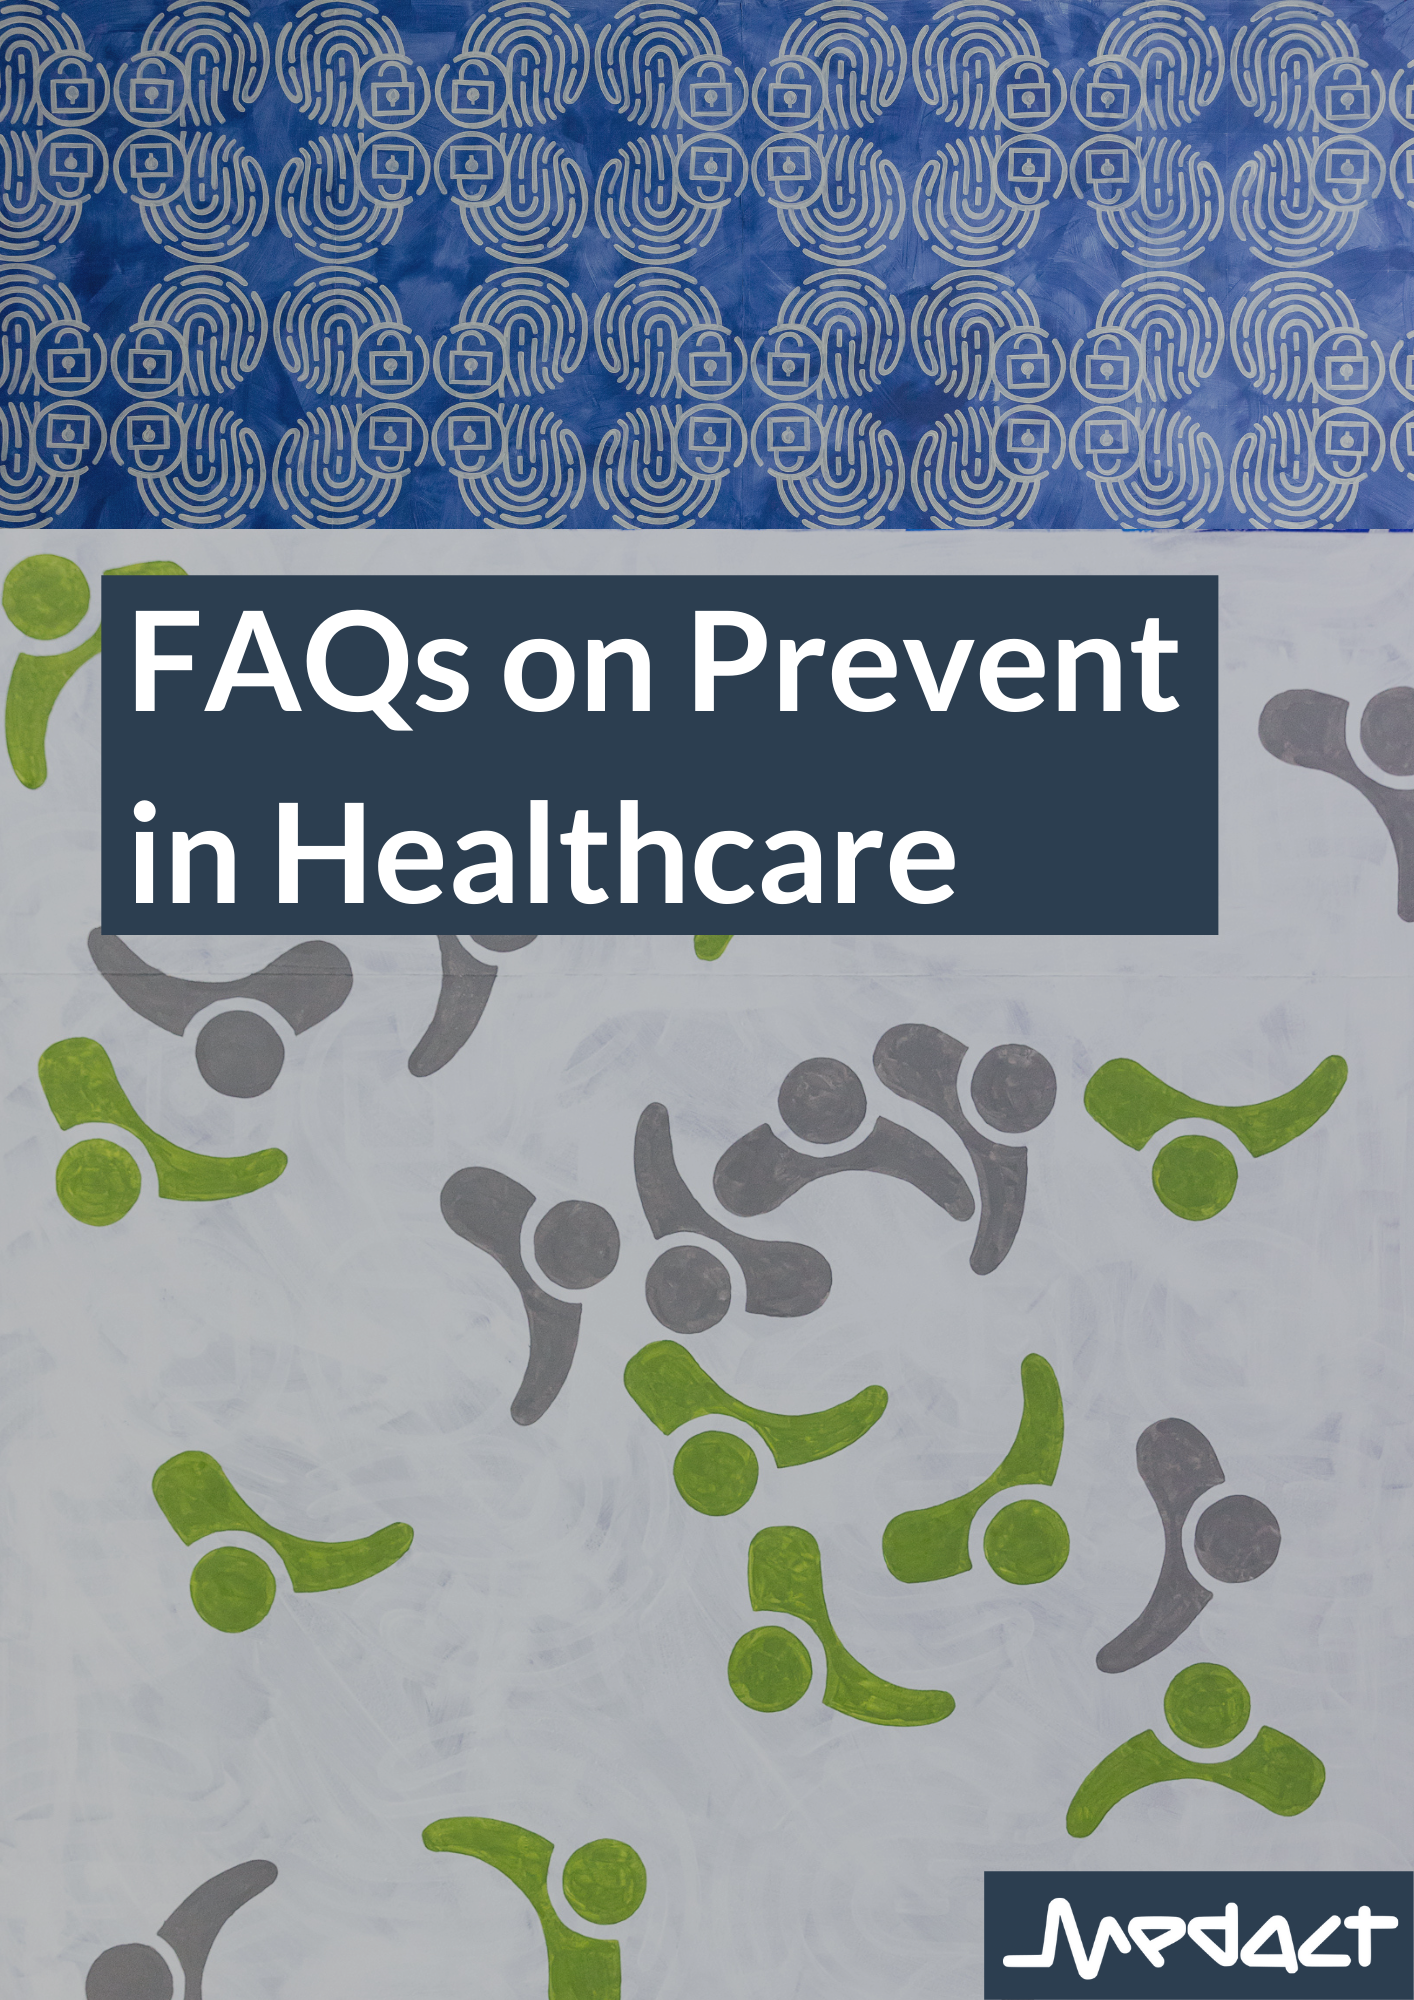 Frequently Asked Questions About The Prevent Duty in Healthcare